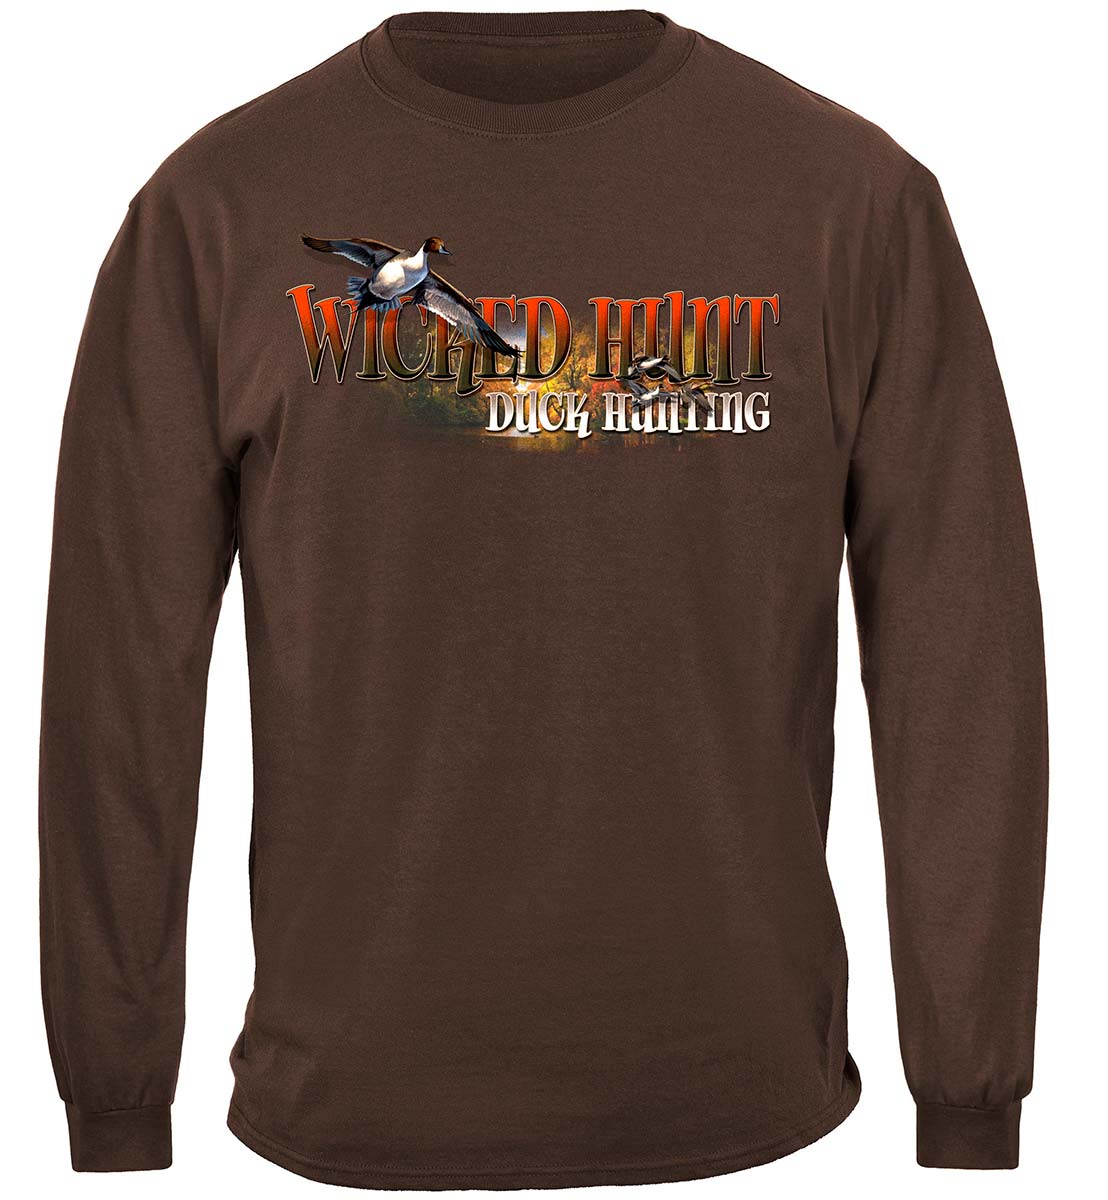 Duck Hunting In A Fowl Mood Premium Long Sleeves